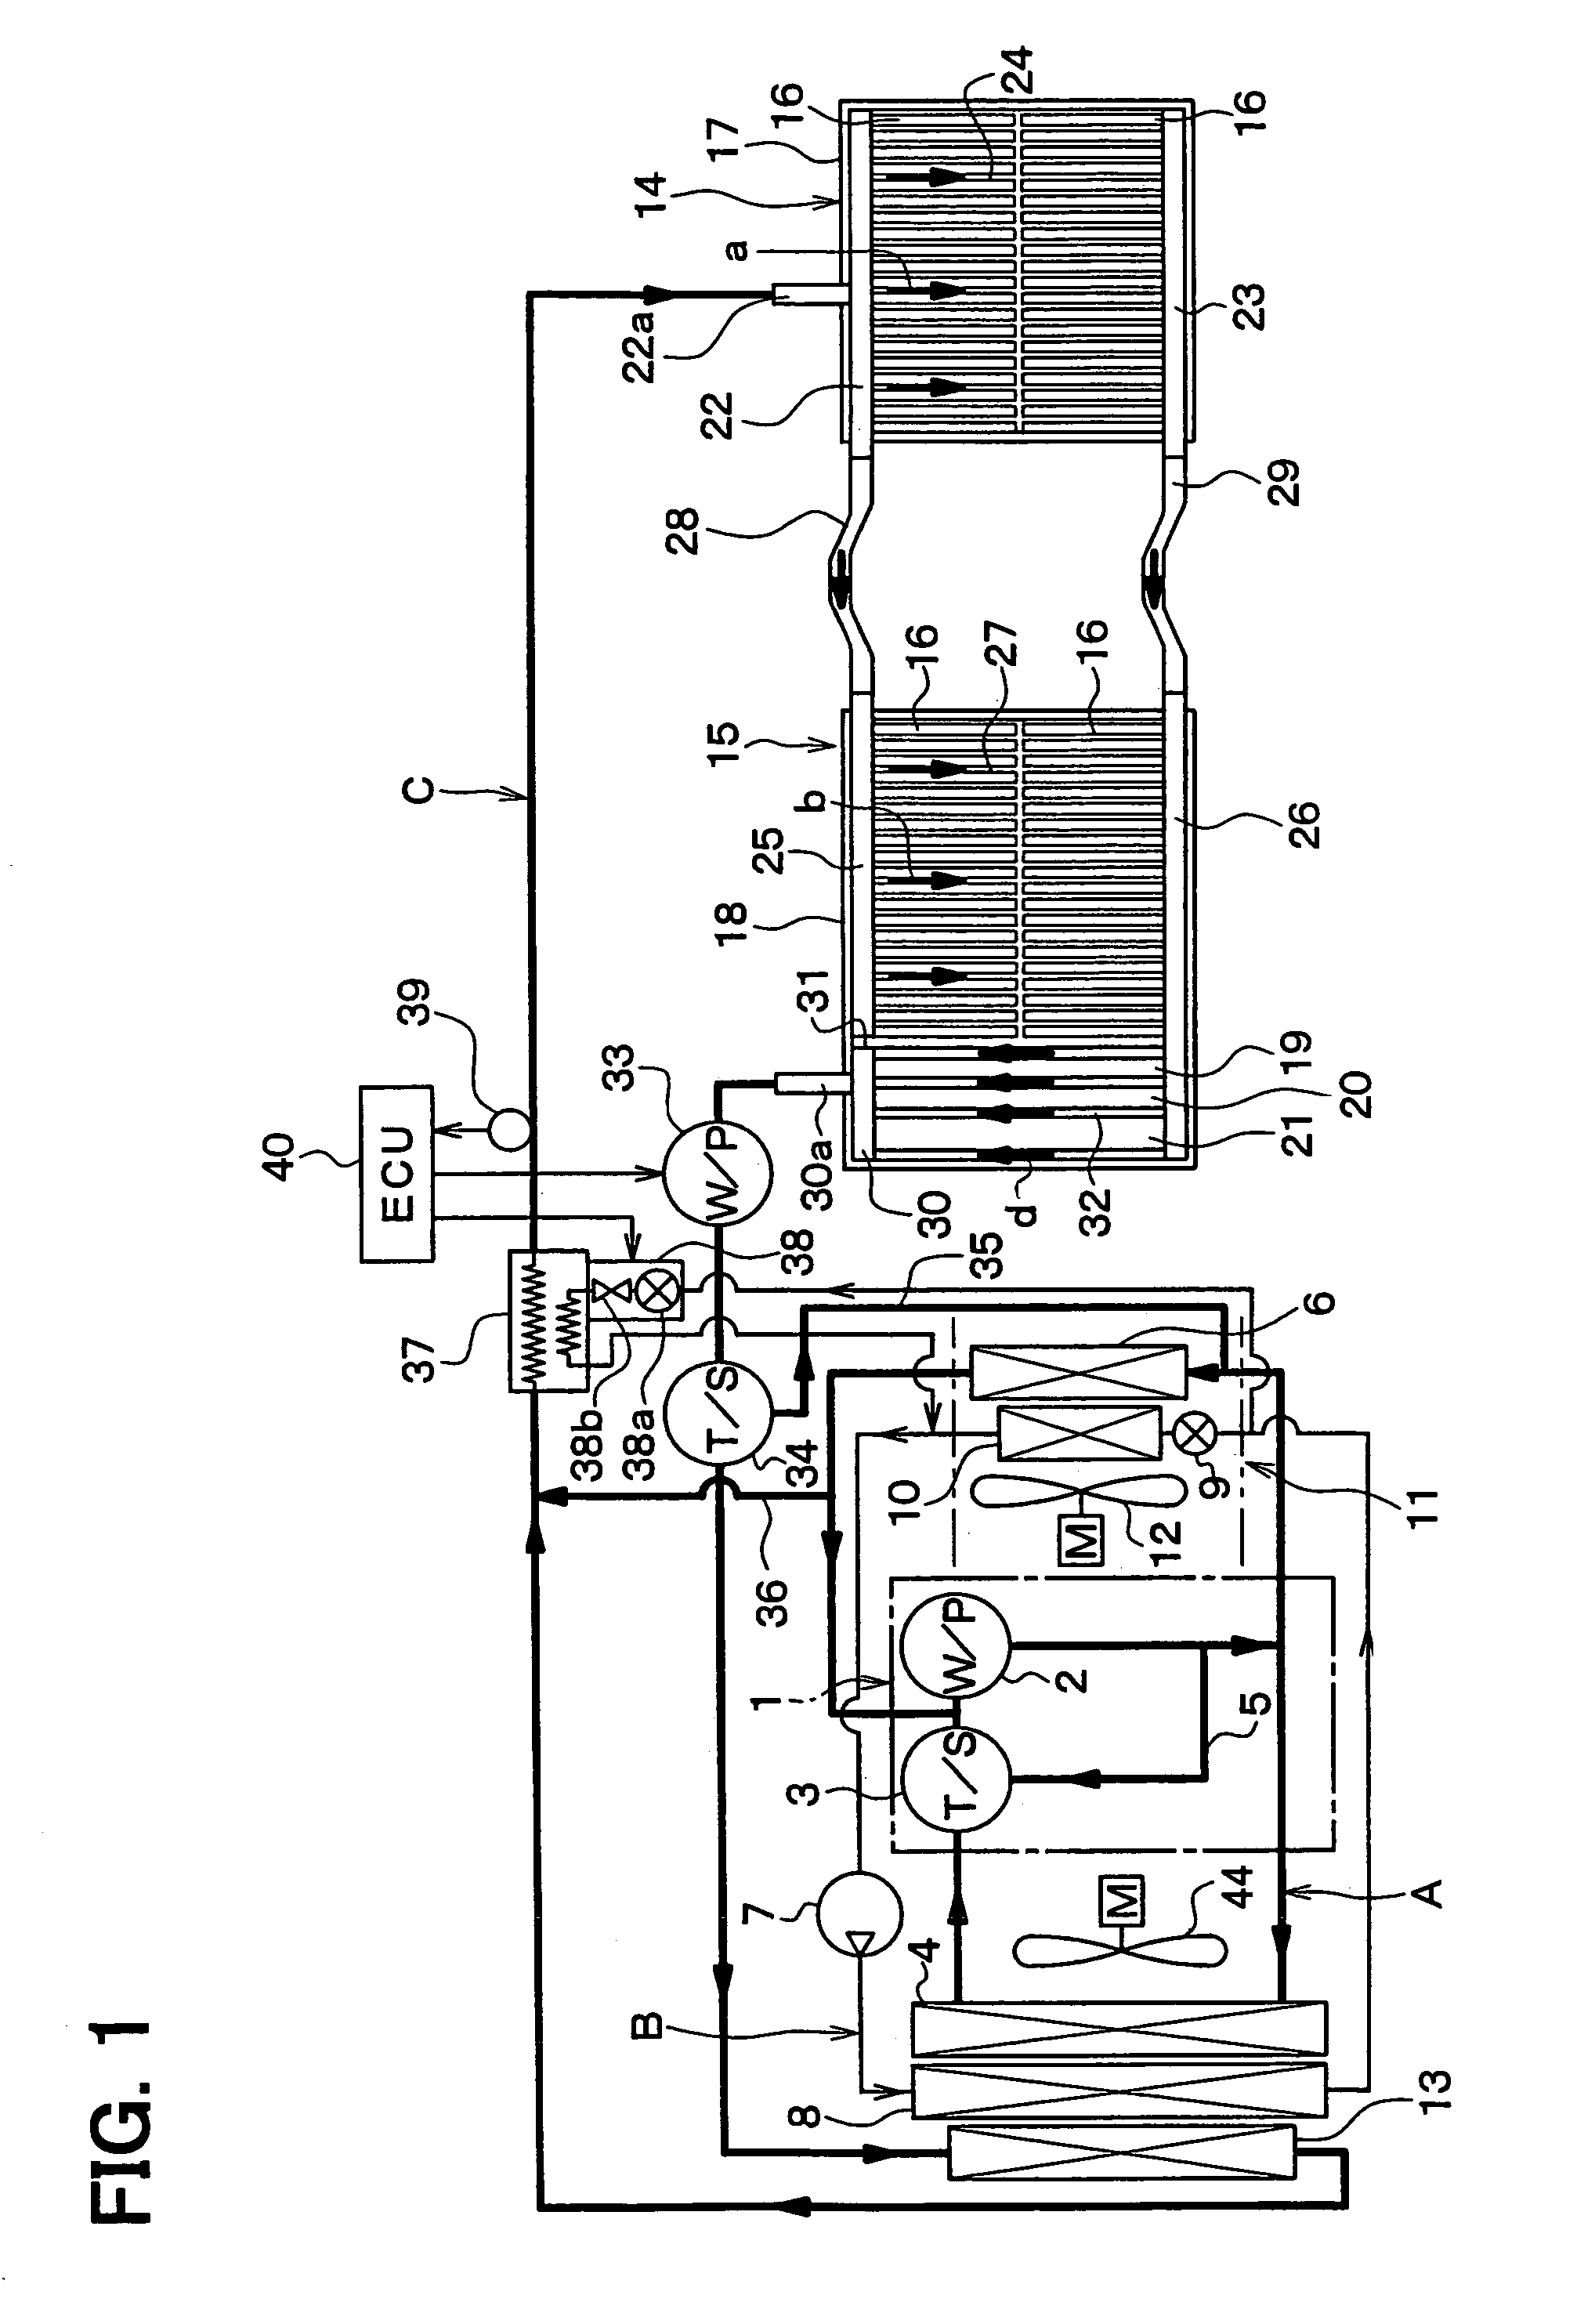 Cooling structure of heat generating member